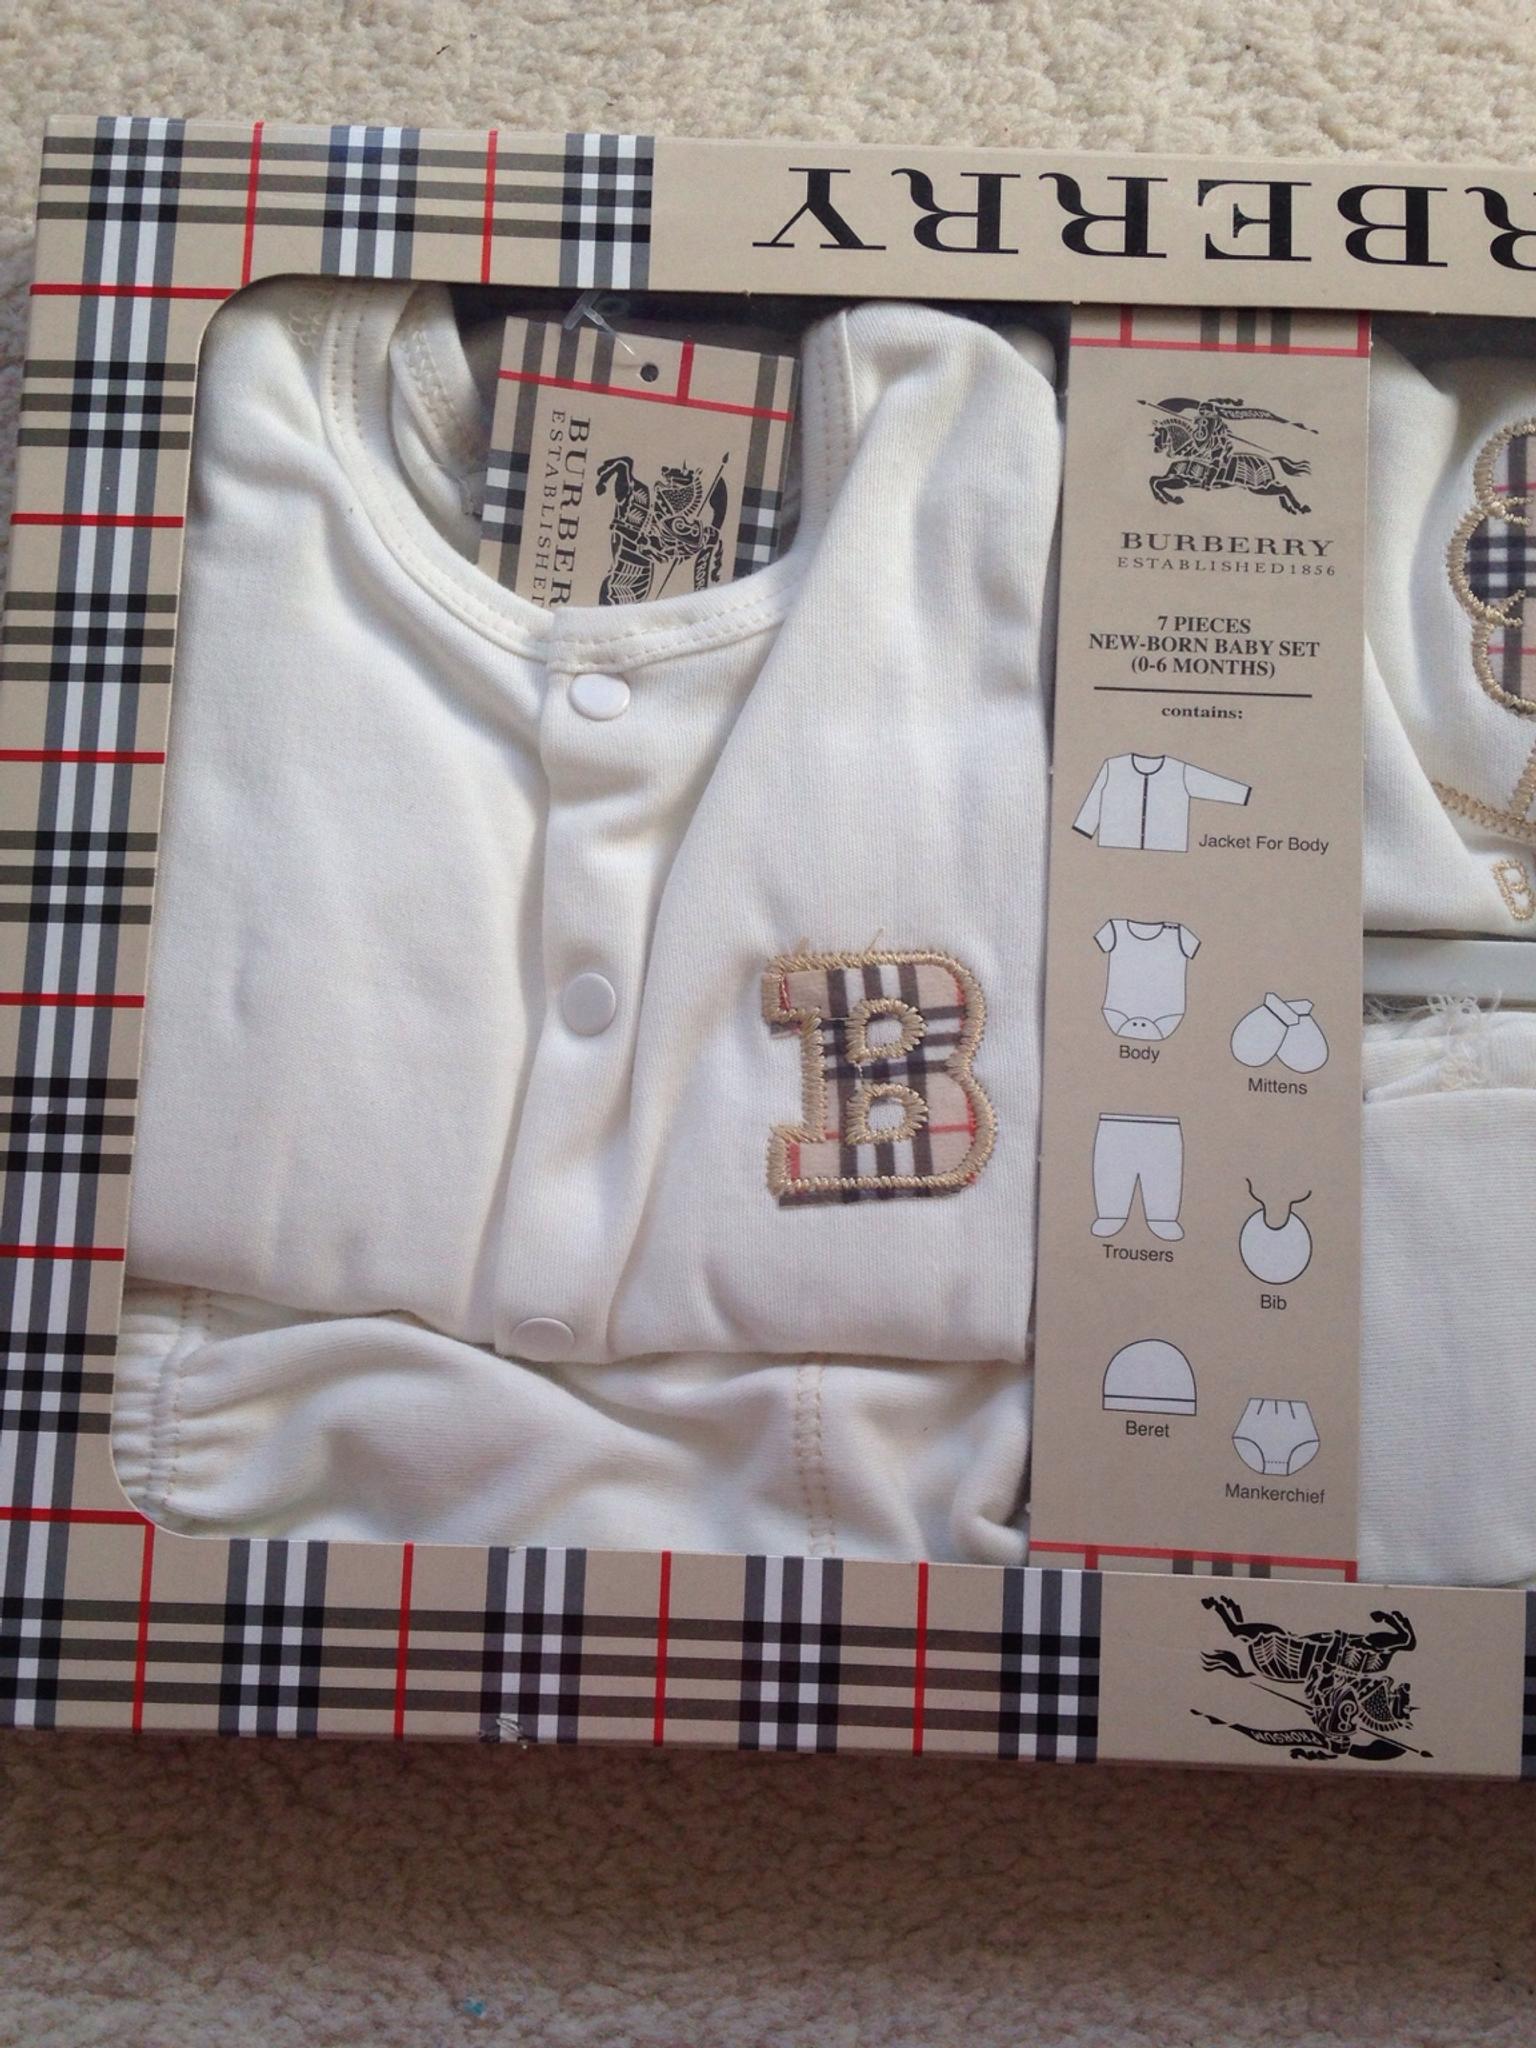 Faux Burberry new born baby set in BN24 